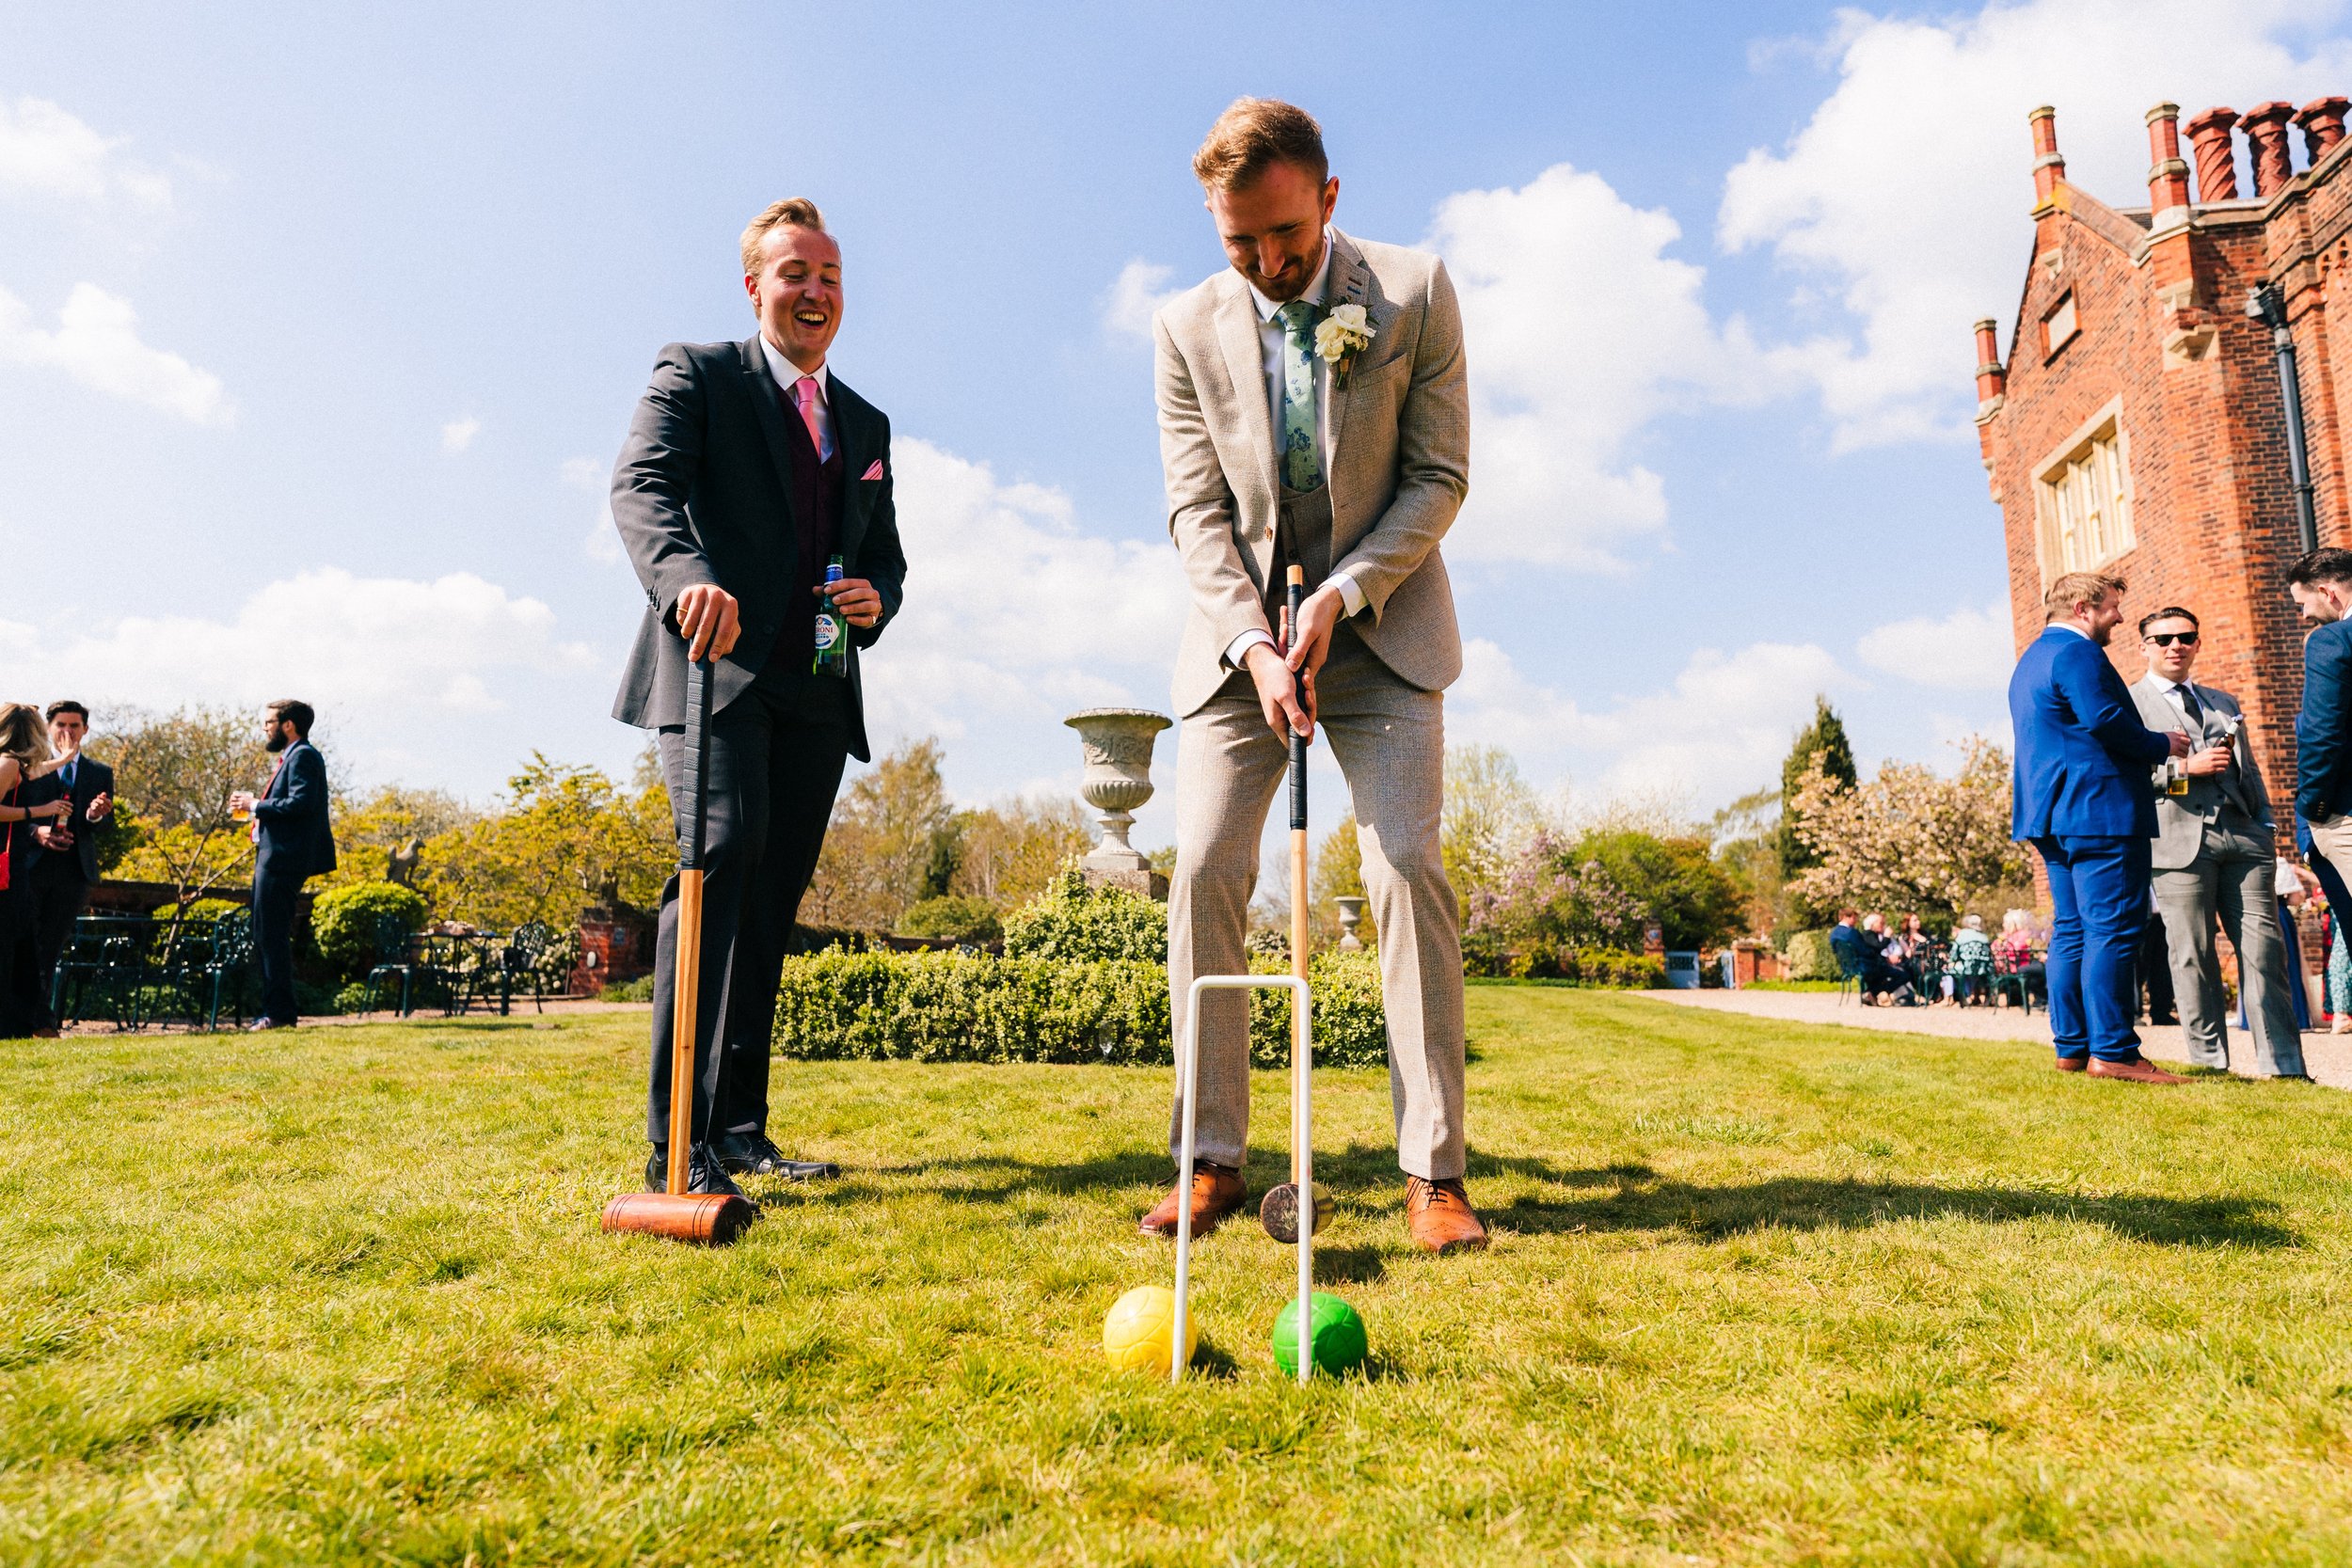 HODSOCK PRIORY WEDDING PHOTOGRAPHY - groom plays croquet in the gardens of hodsock priory